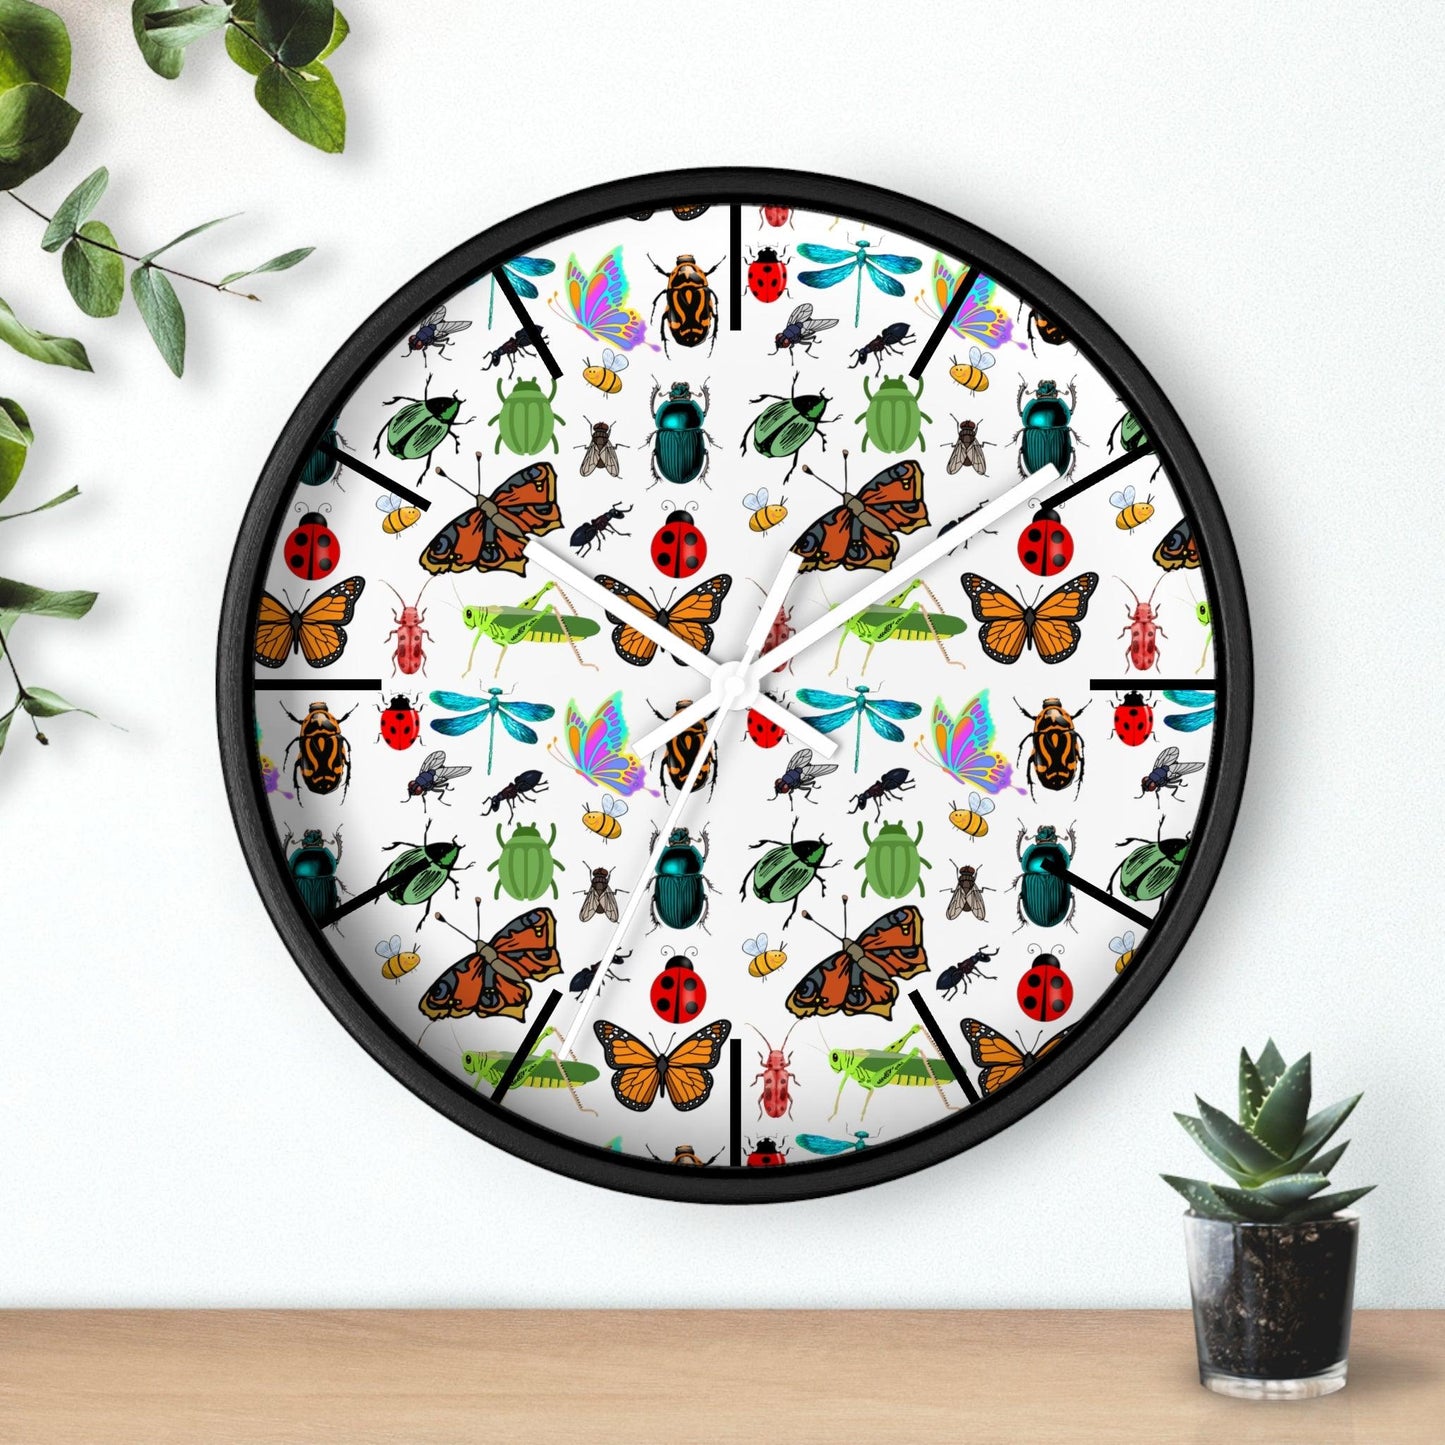 Bug Wall Clock Wall Clock Insects Wall Clock Home Decor Gift House Warming Gift - Unique Gift Farmhouse Clocks For Wall Living Room Bedroom